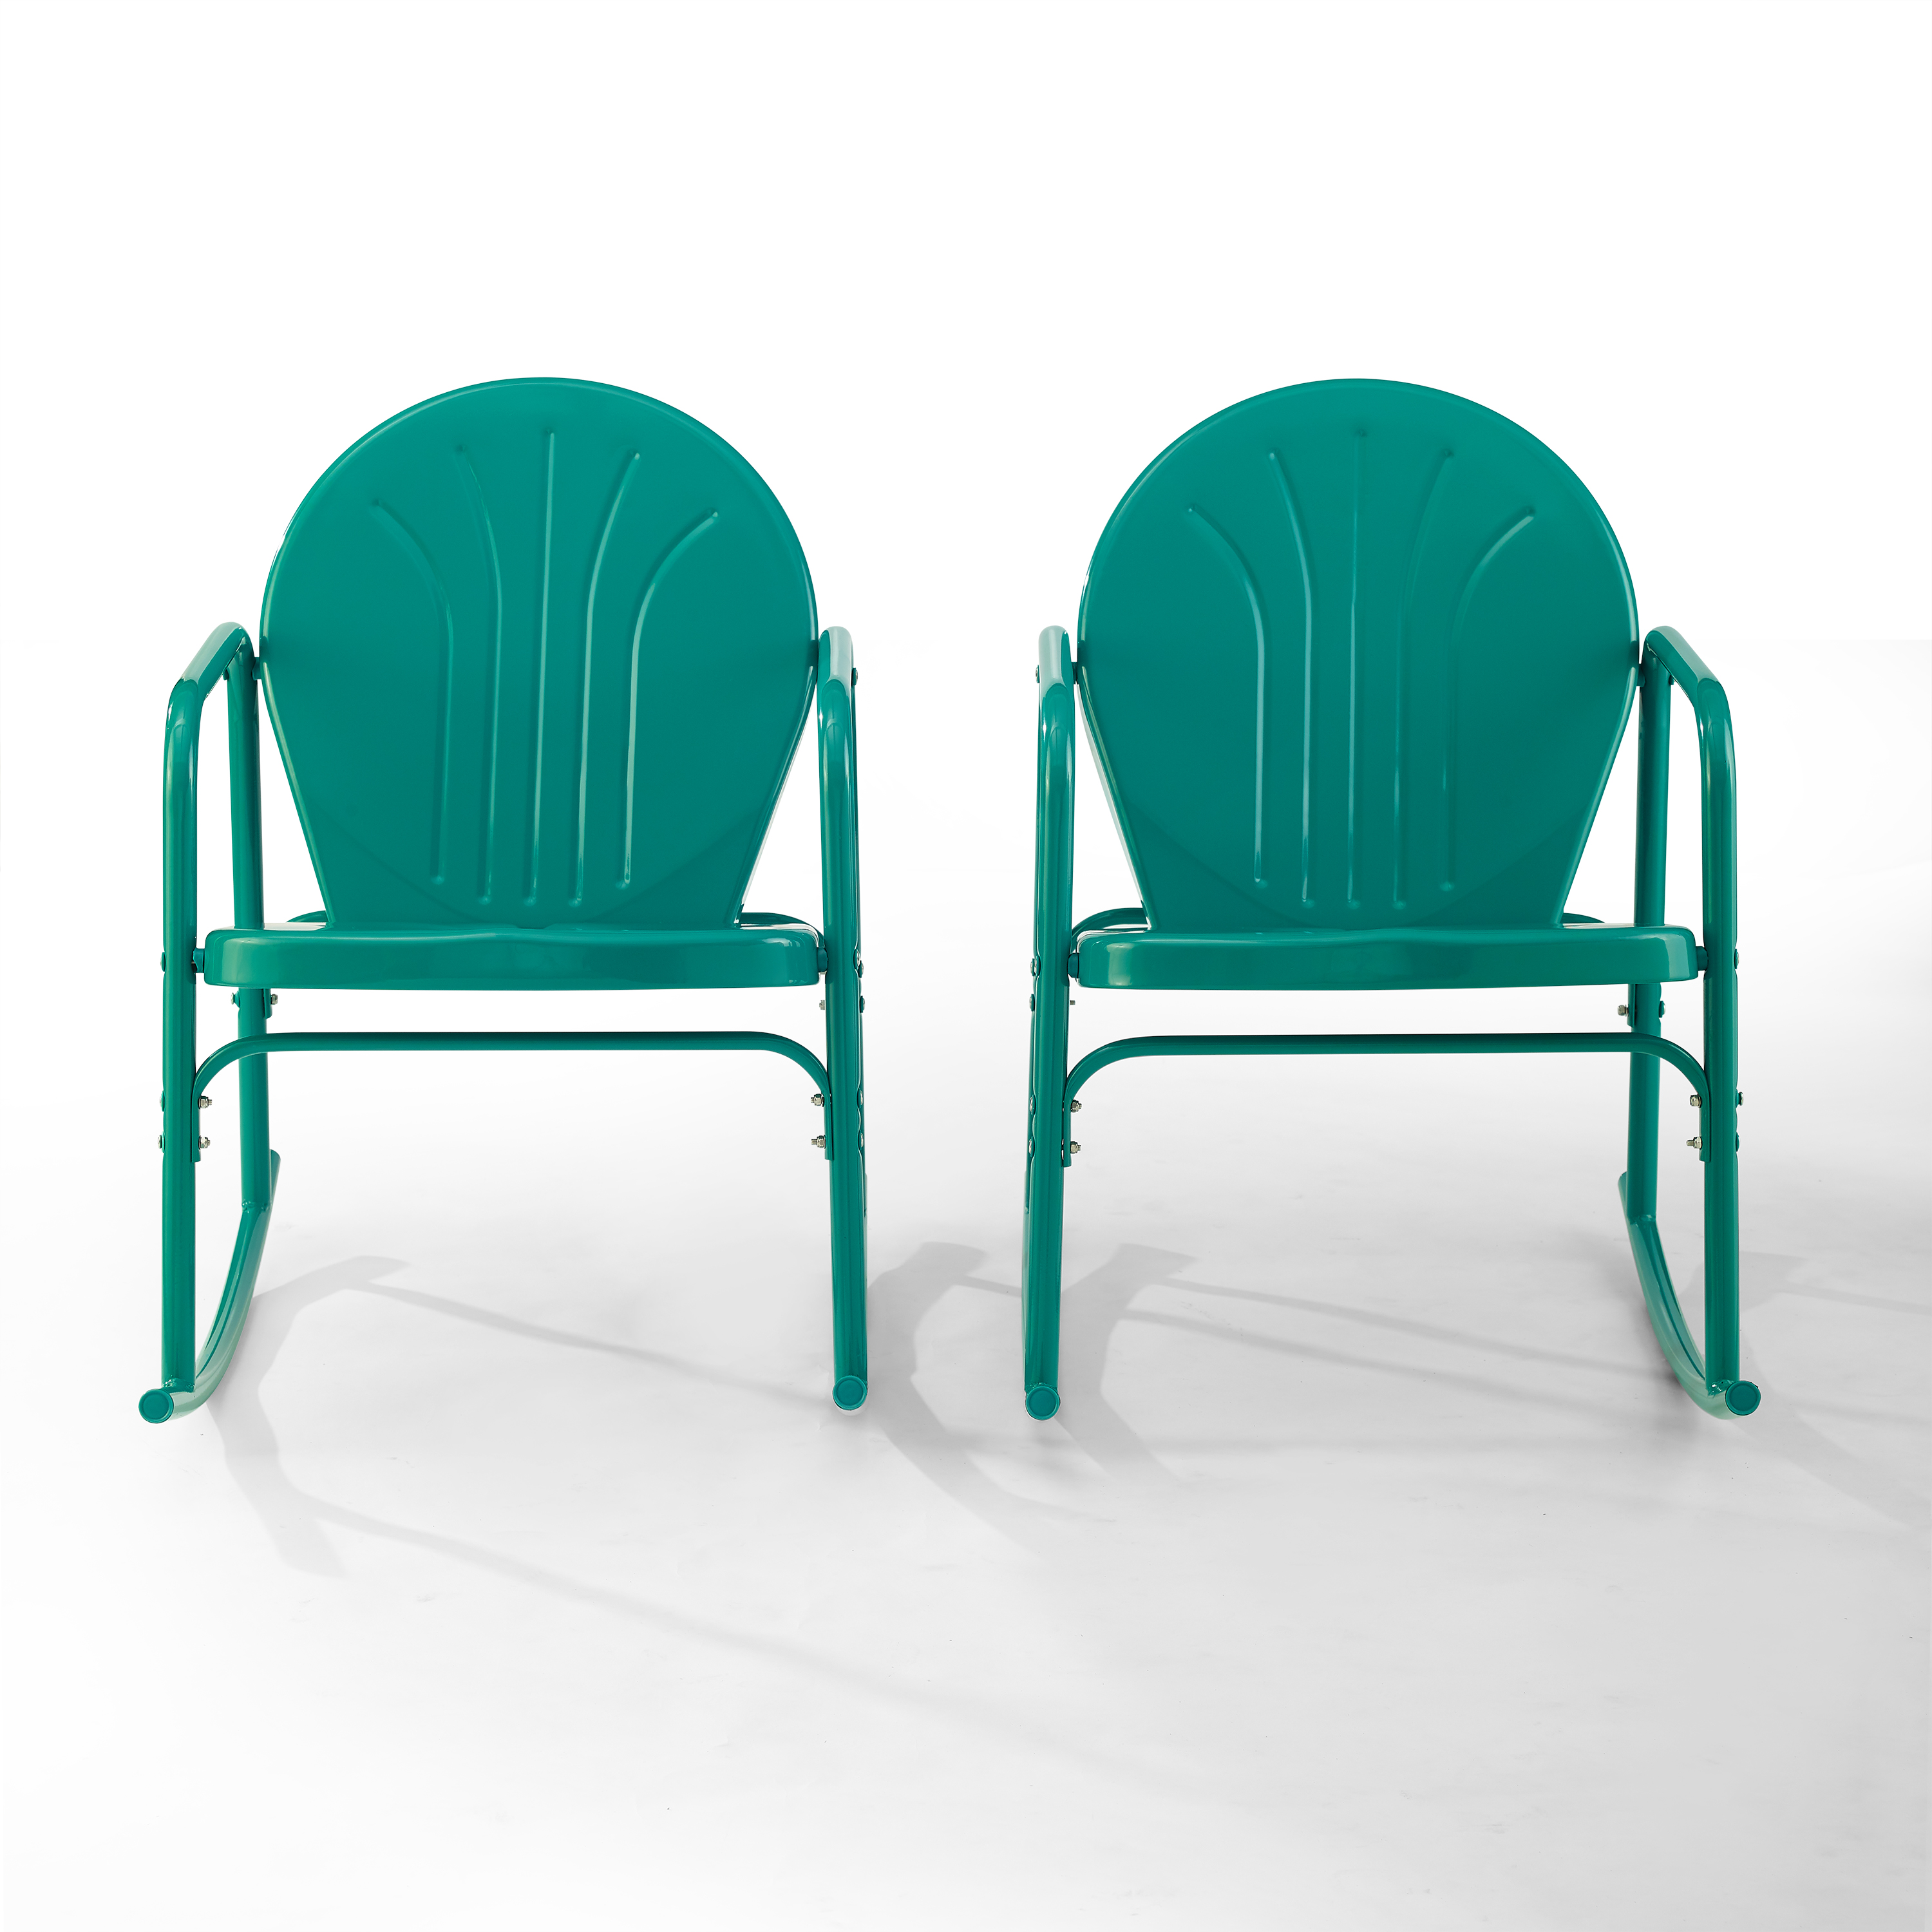 Crosley Furniture Griffith 2Pc Outdoor Powder Coated Rocking Chair Set, 2 Chairs, Green - image 1 of 13